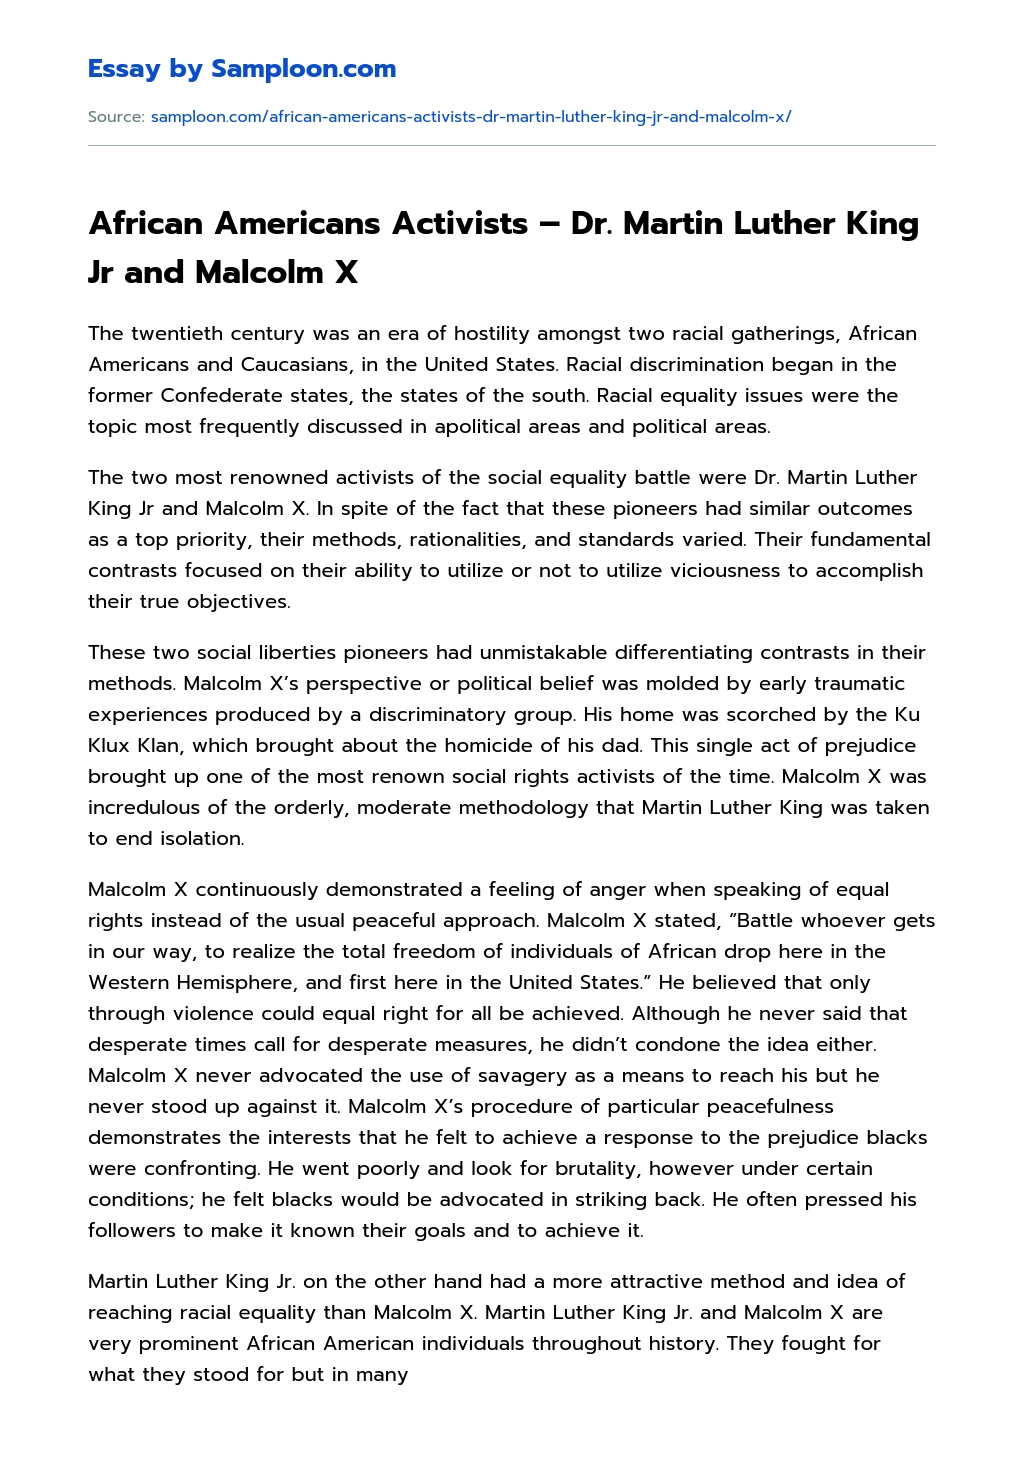 African Americans Activists – Dr. Martin Luther King Jr and Malcolm X essay